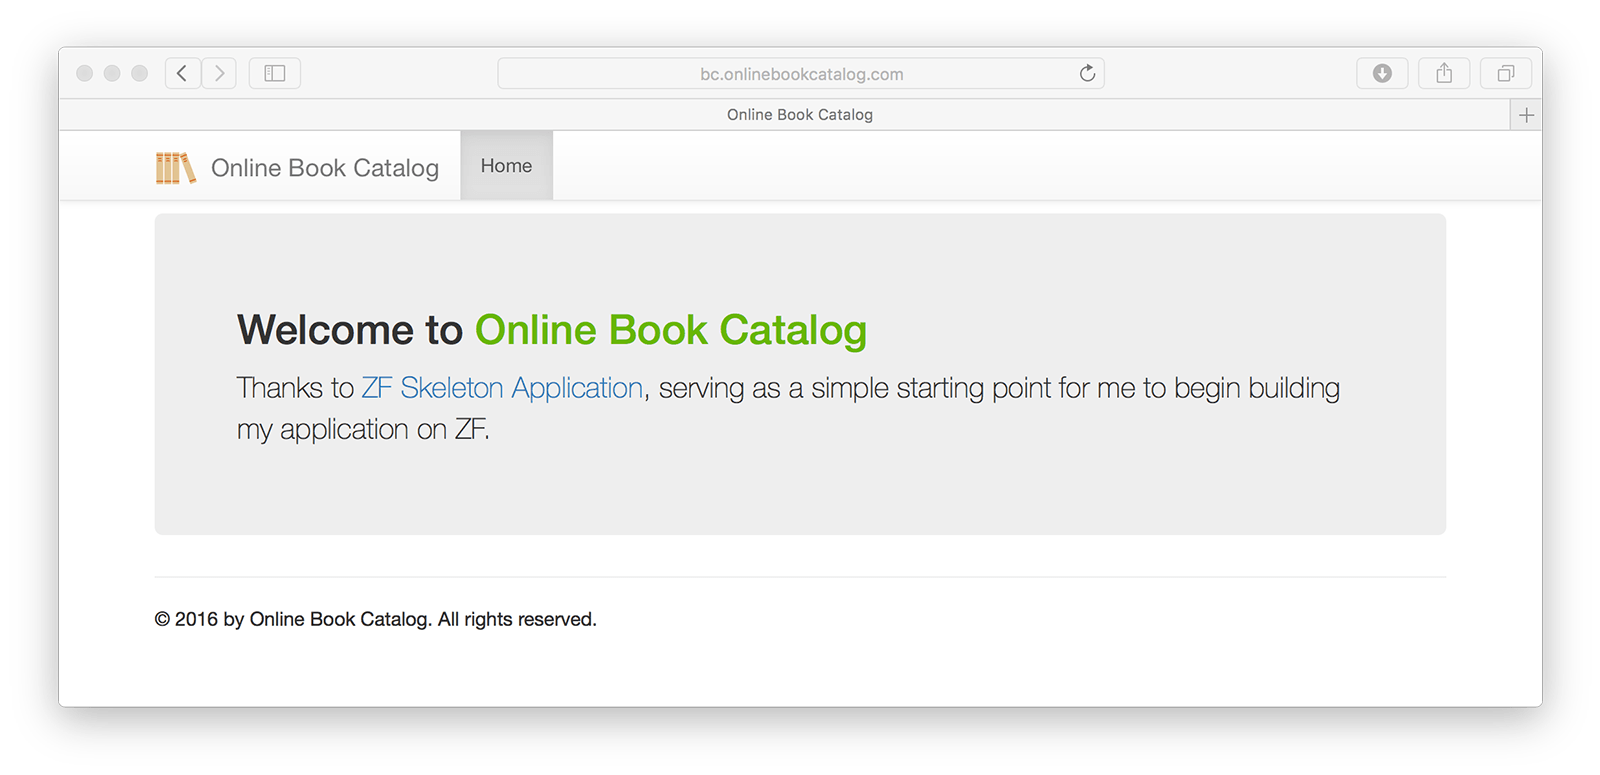 Customized look of the Online Book Catalog.